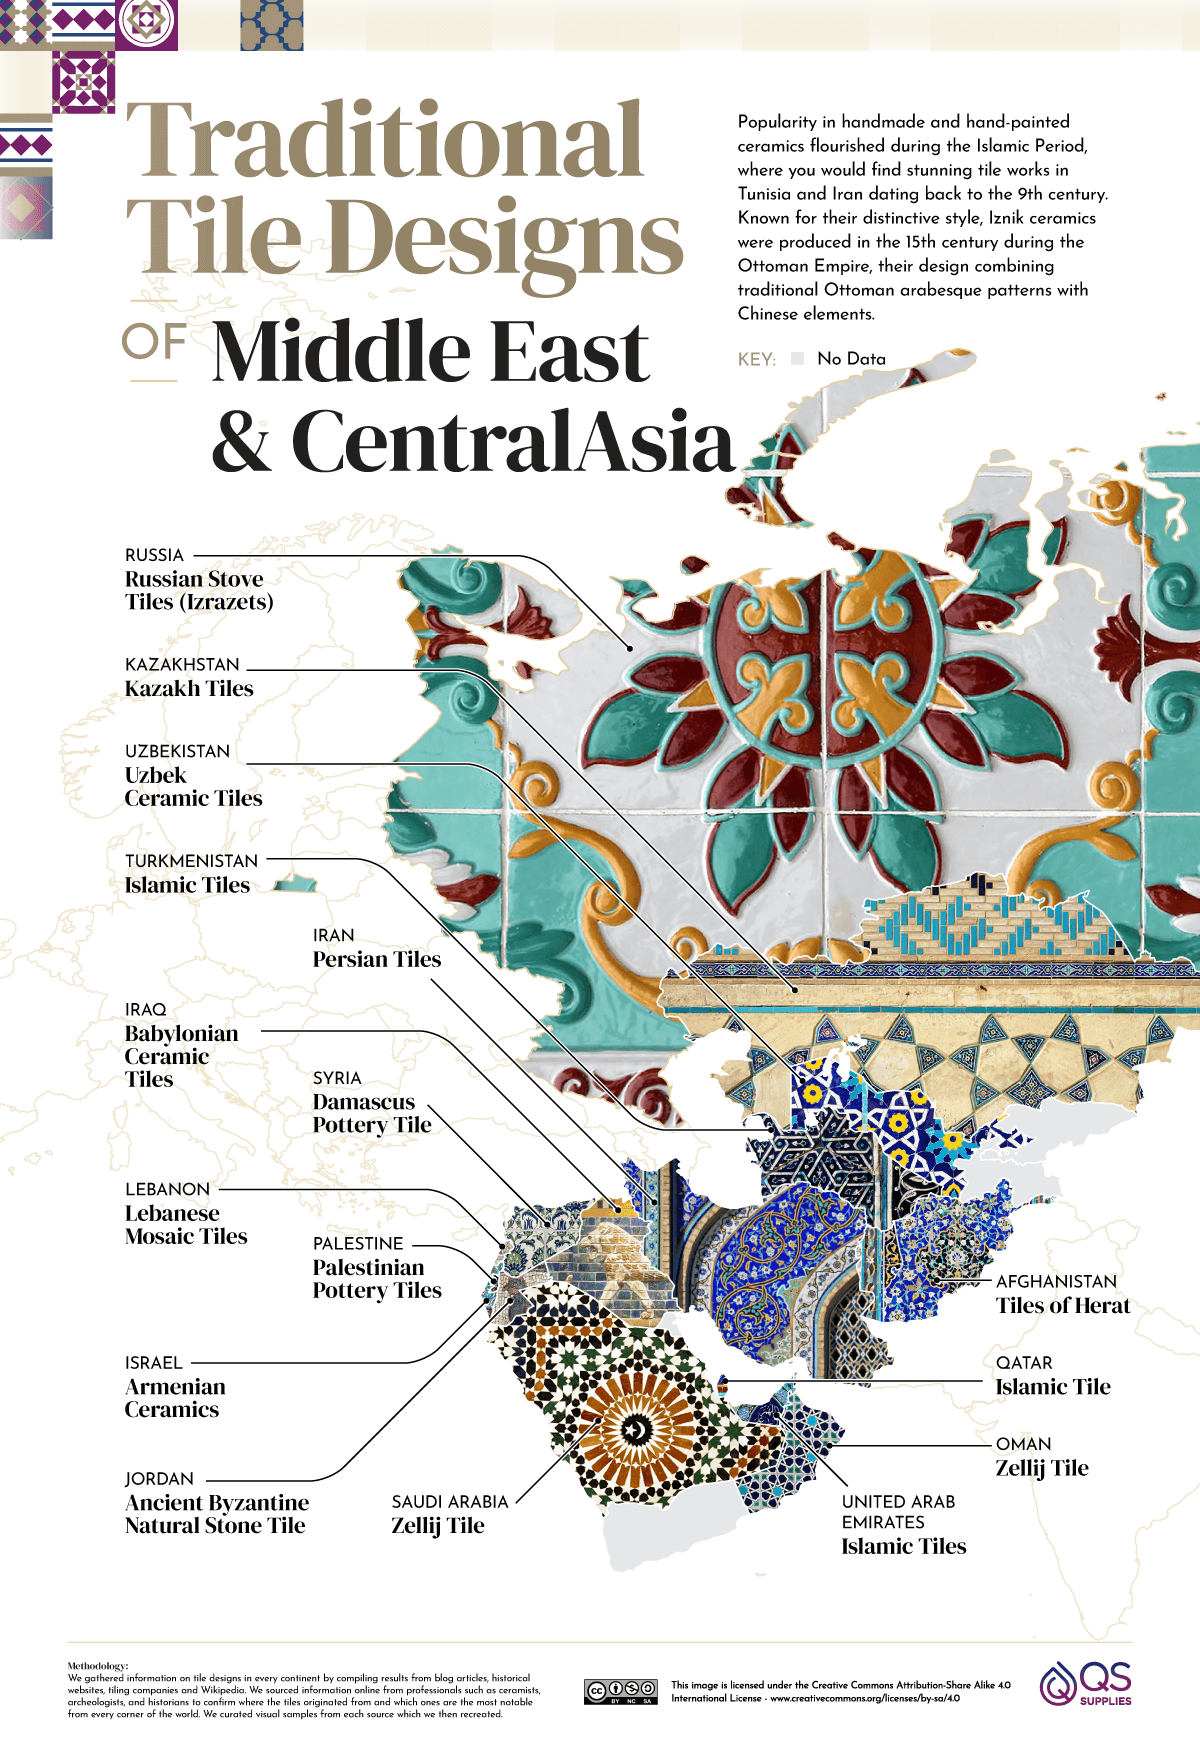 Traditional Tile Designs of Middle East & Central Asia